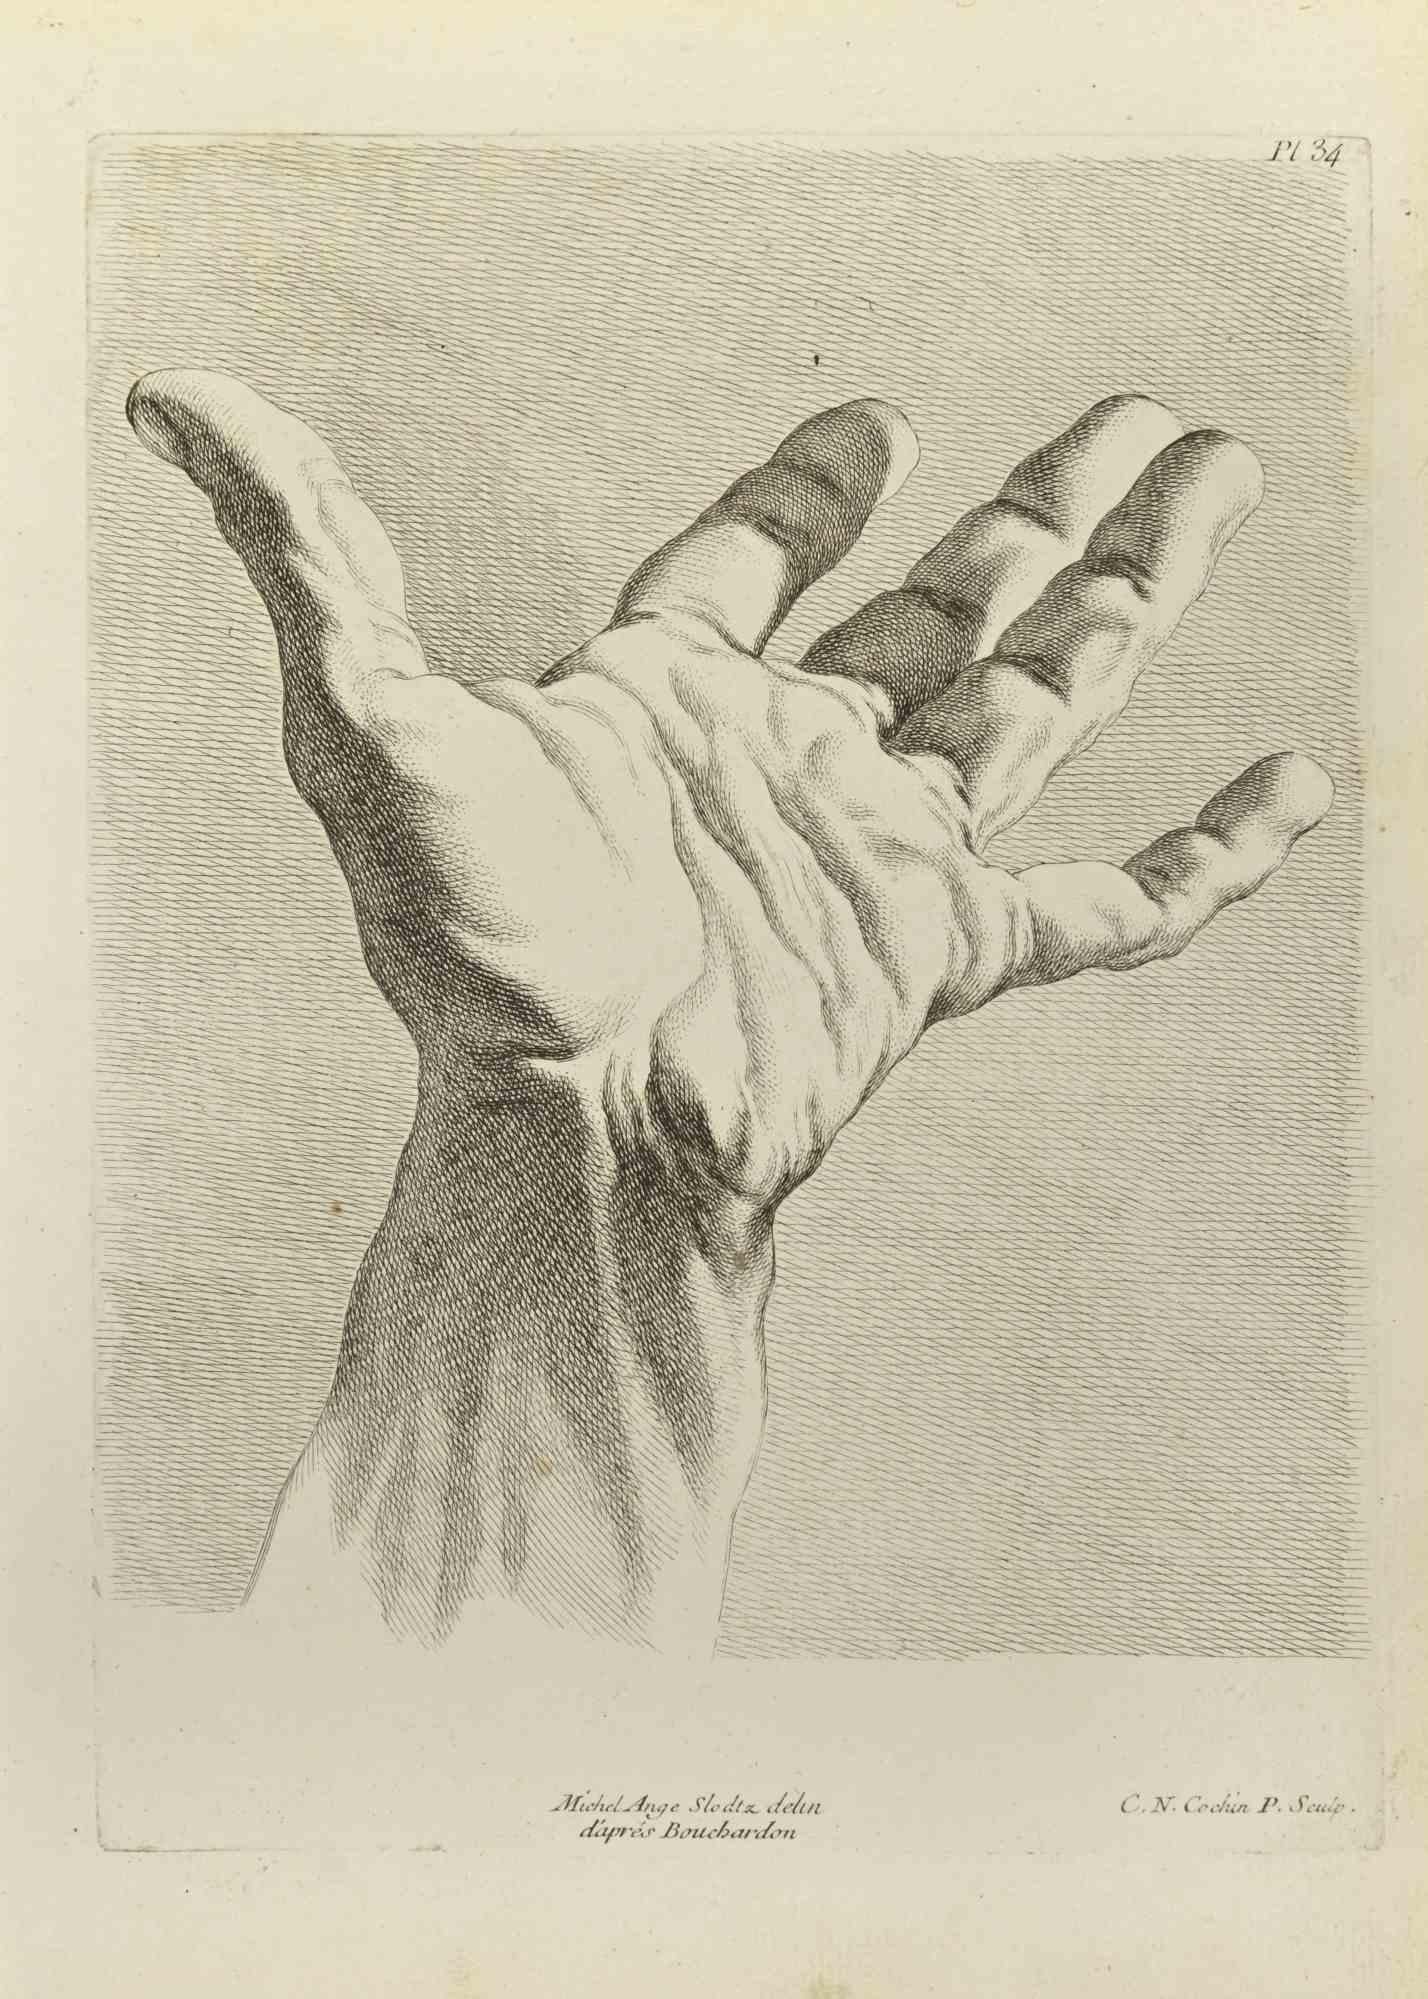 The Study of Hand after Bouchardon is an etching realized by Nicholas Cochin in 1755.

Signed on the plate.

Good conditions.

The artwork is depicted through confident strokes.

The etching was realized for the anatomy study “JOMBERT,